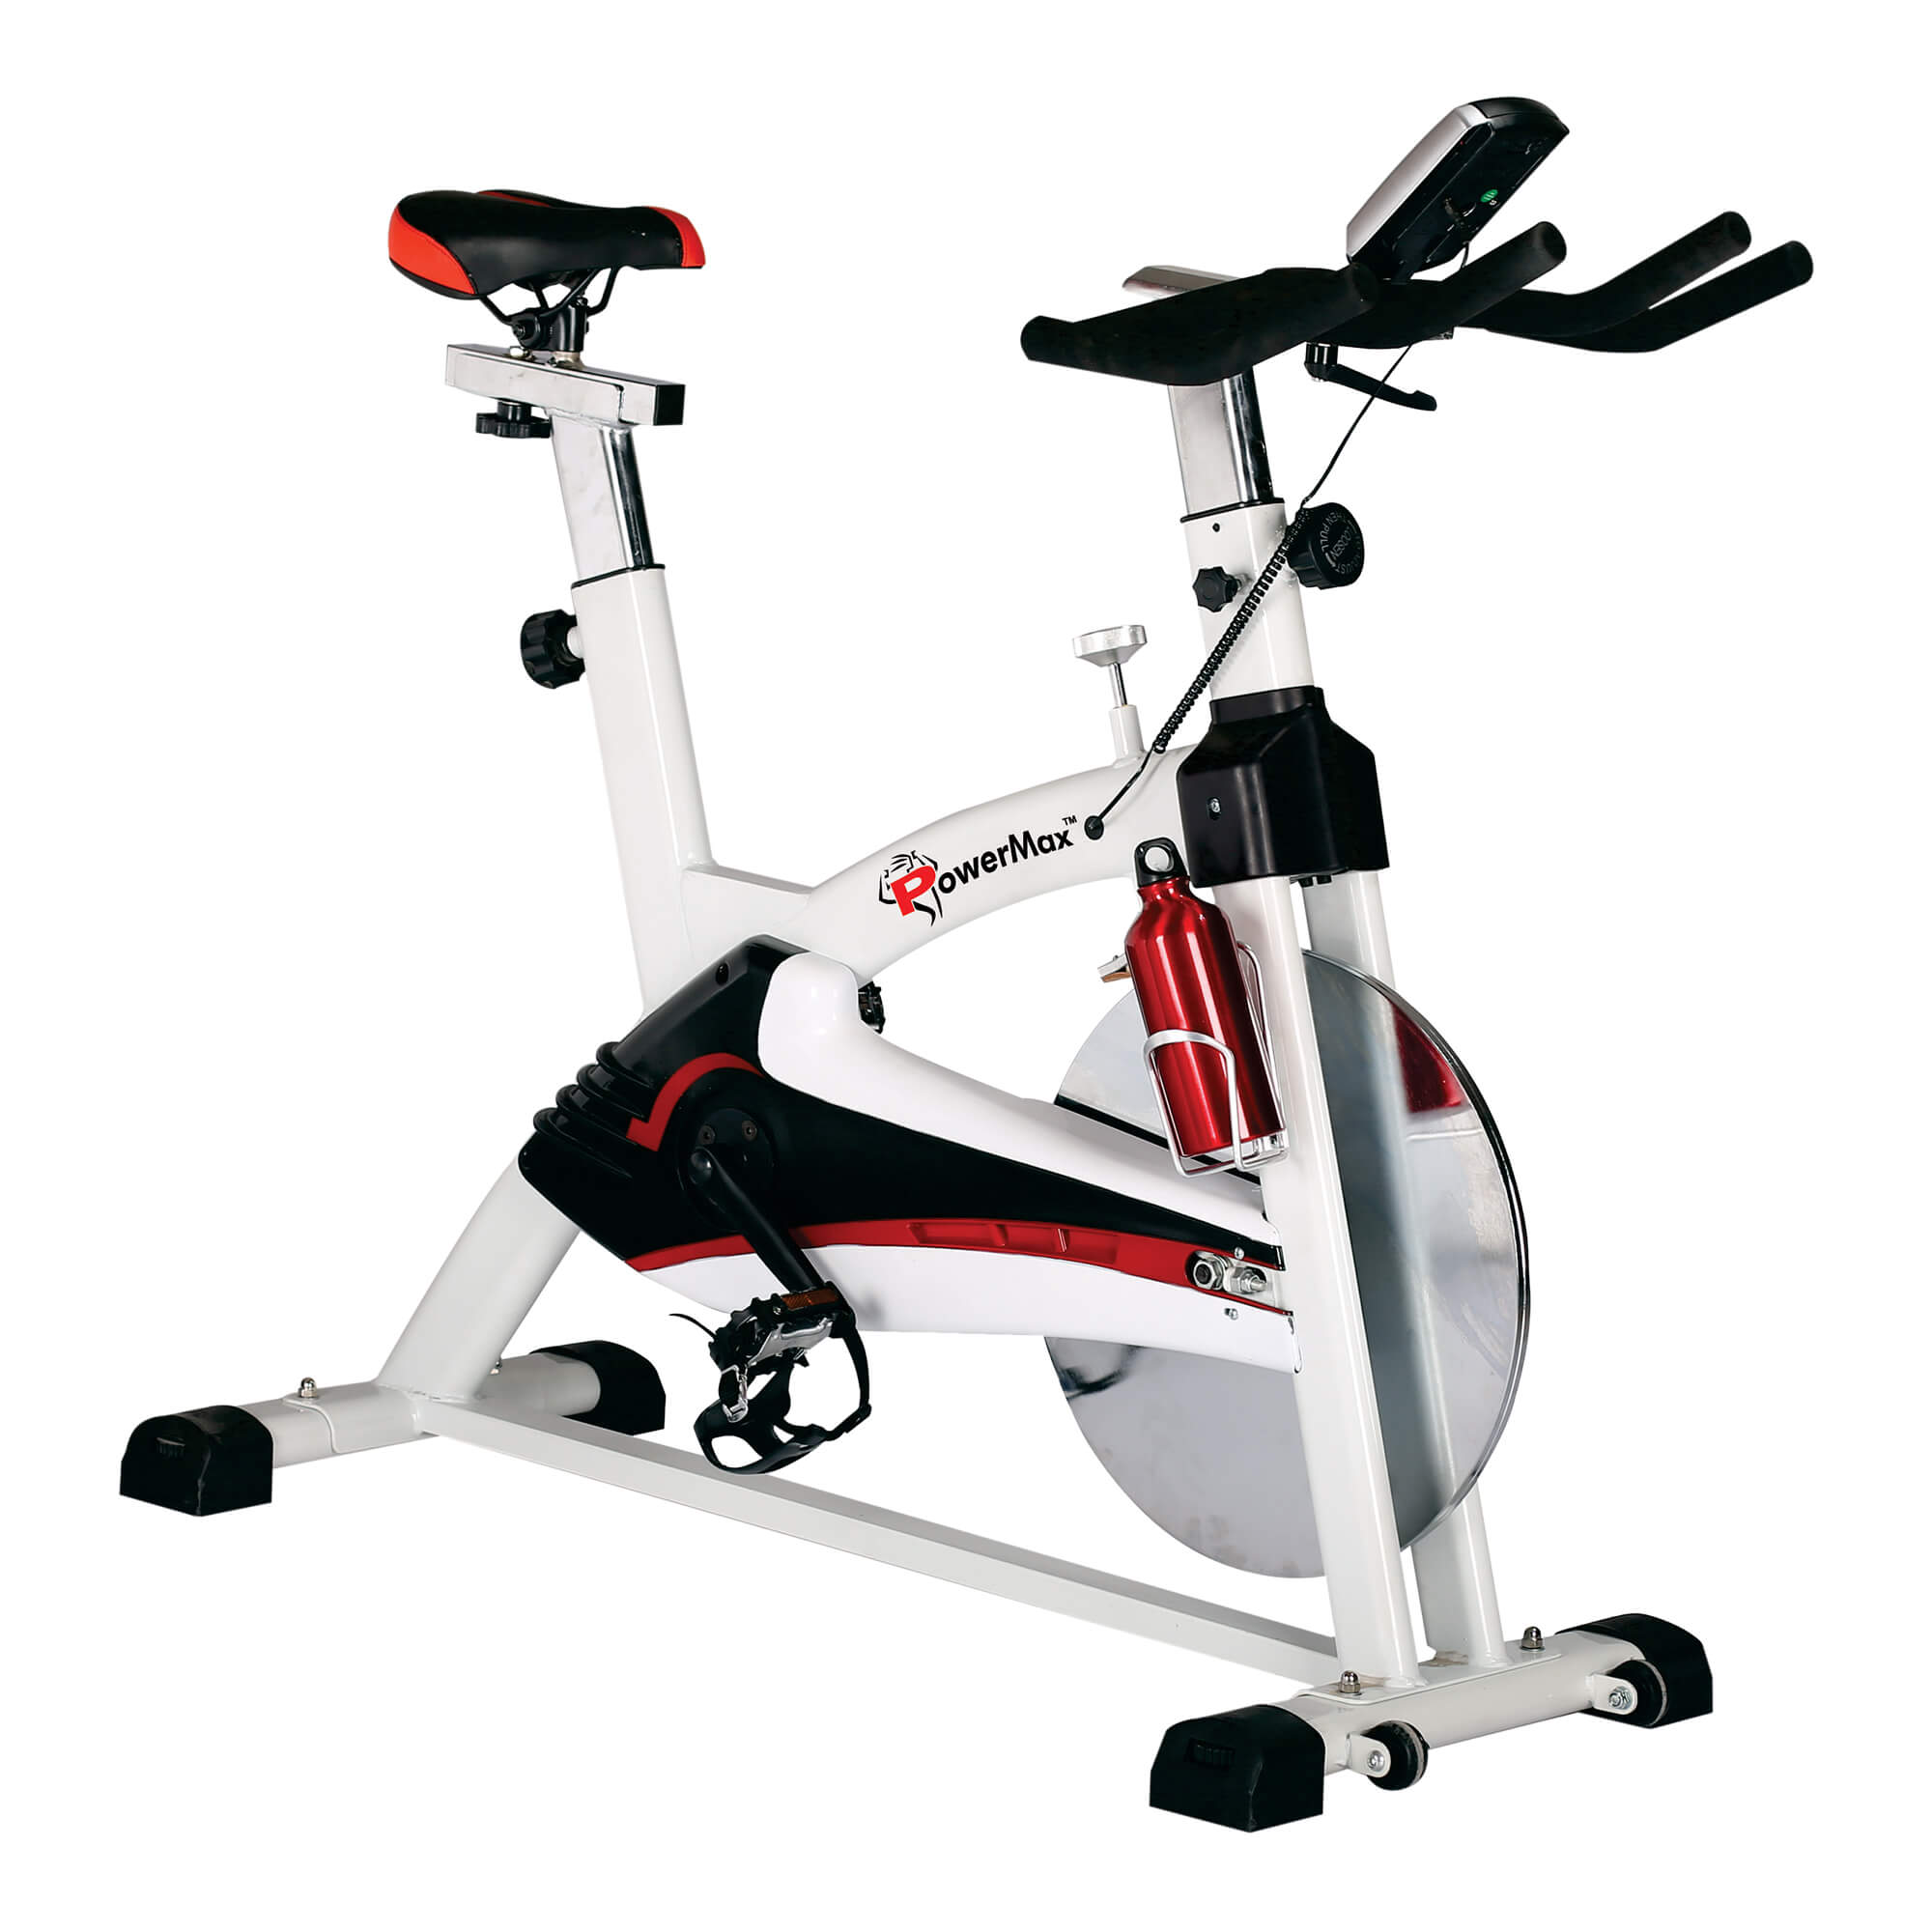 BS 2070C Home Use Group Bike with Free Shipping